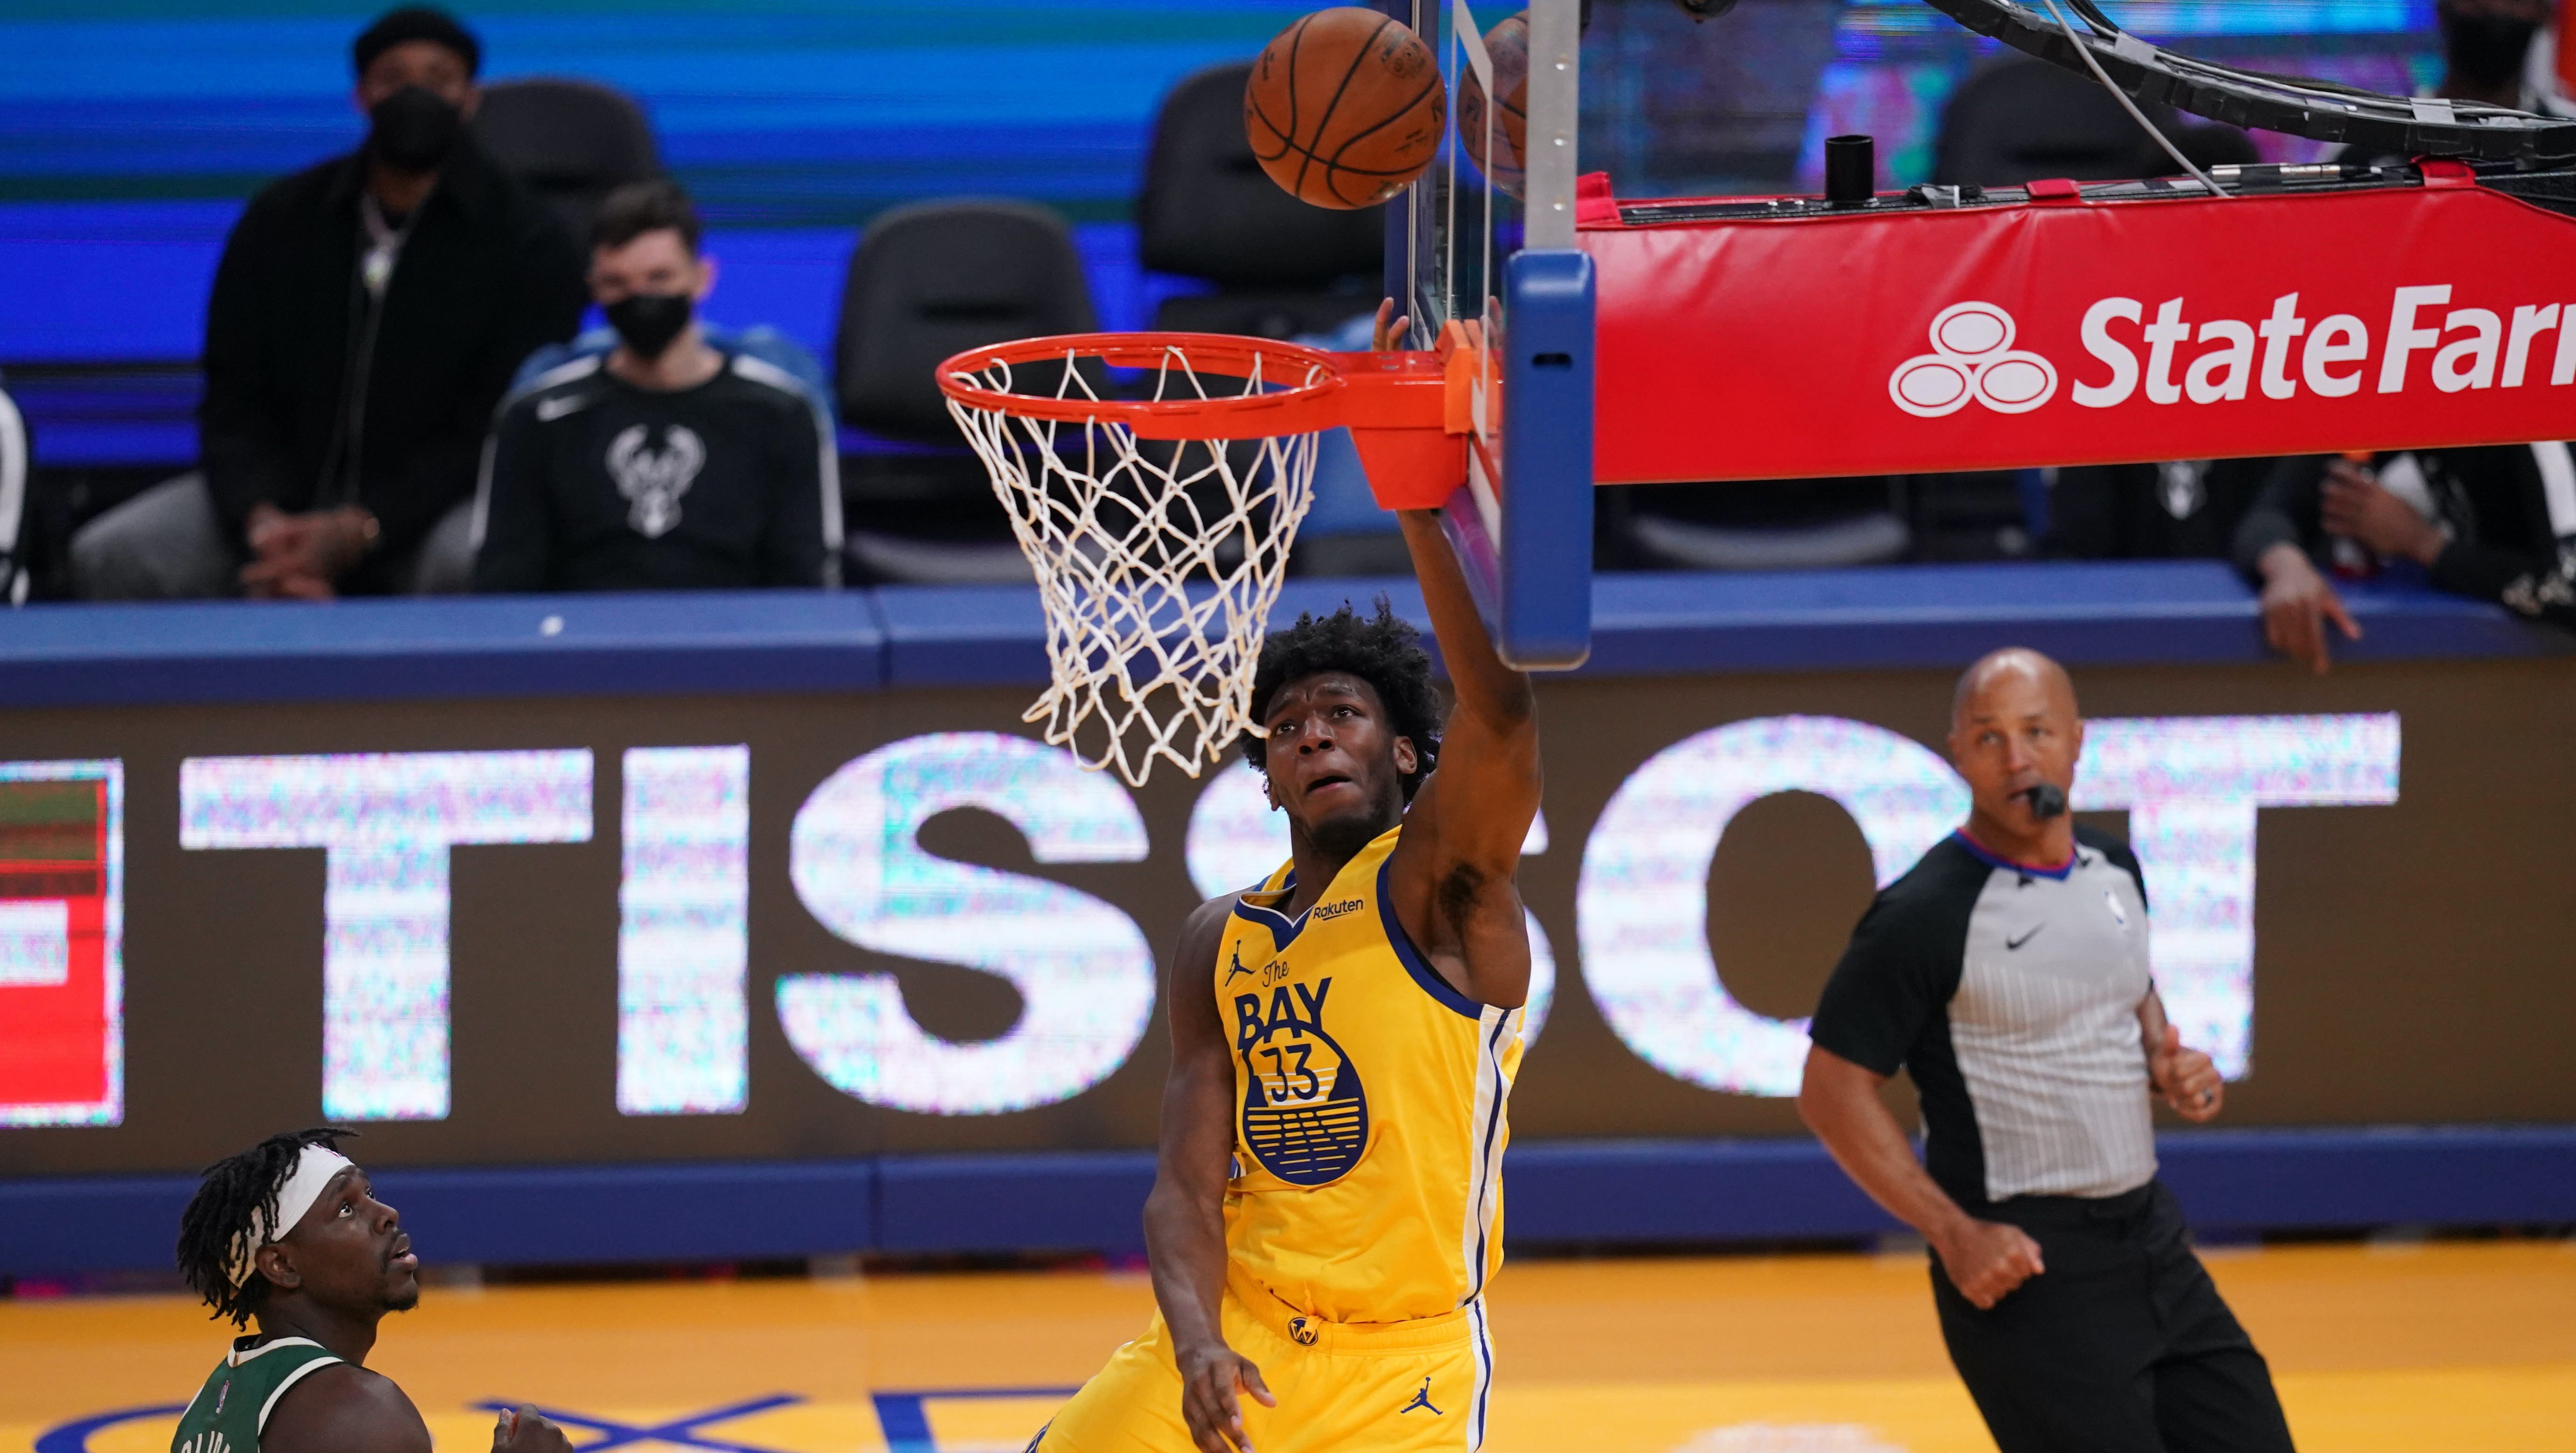 Warriors’ James Wiseman injures knee, likely out for season – report